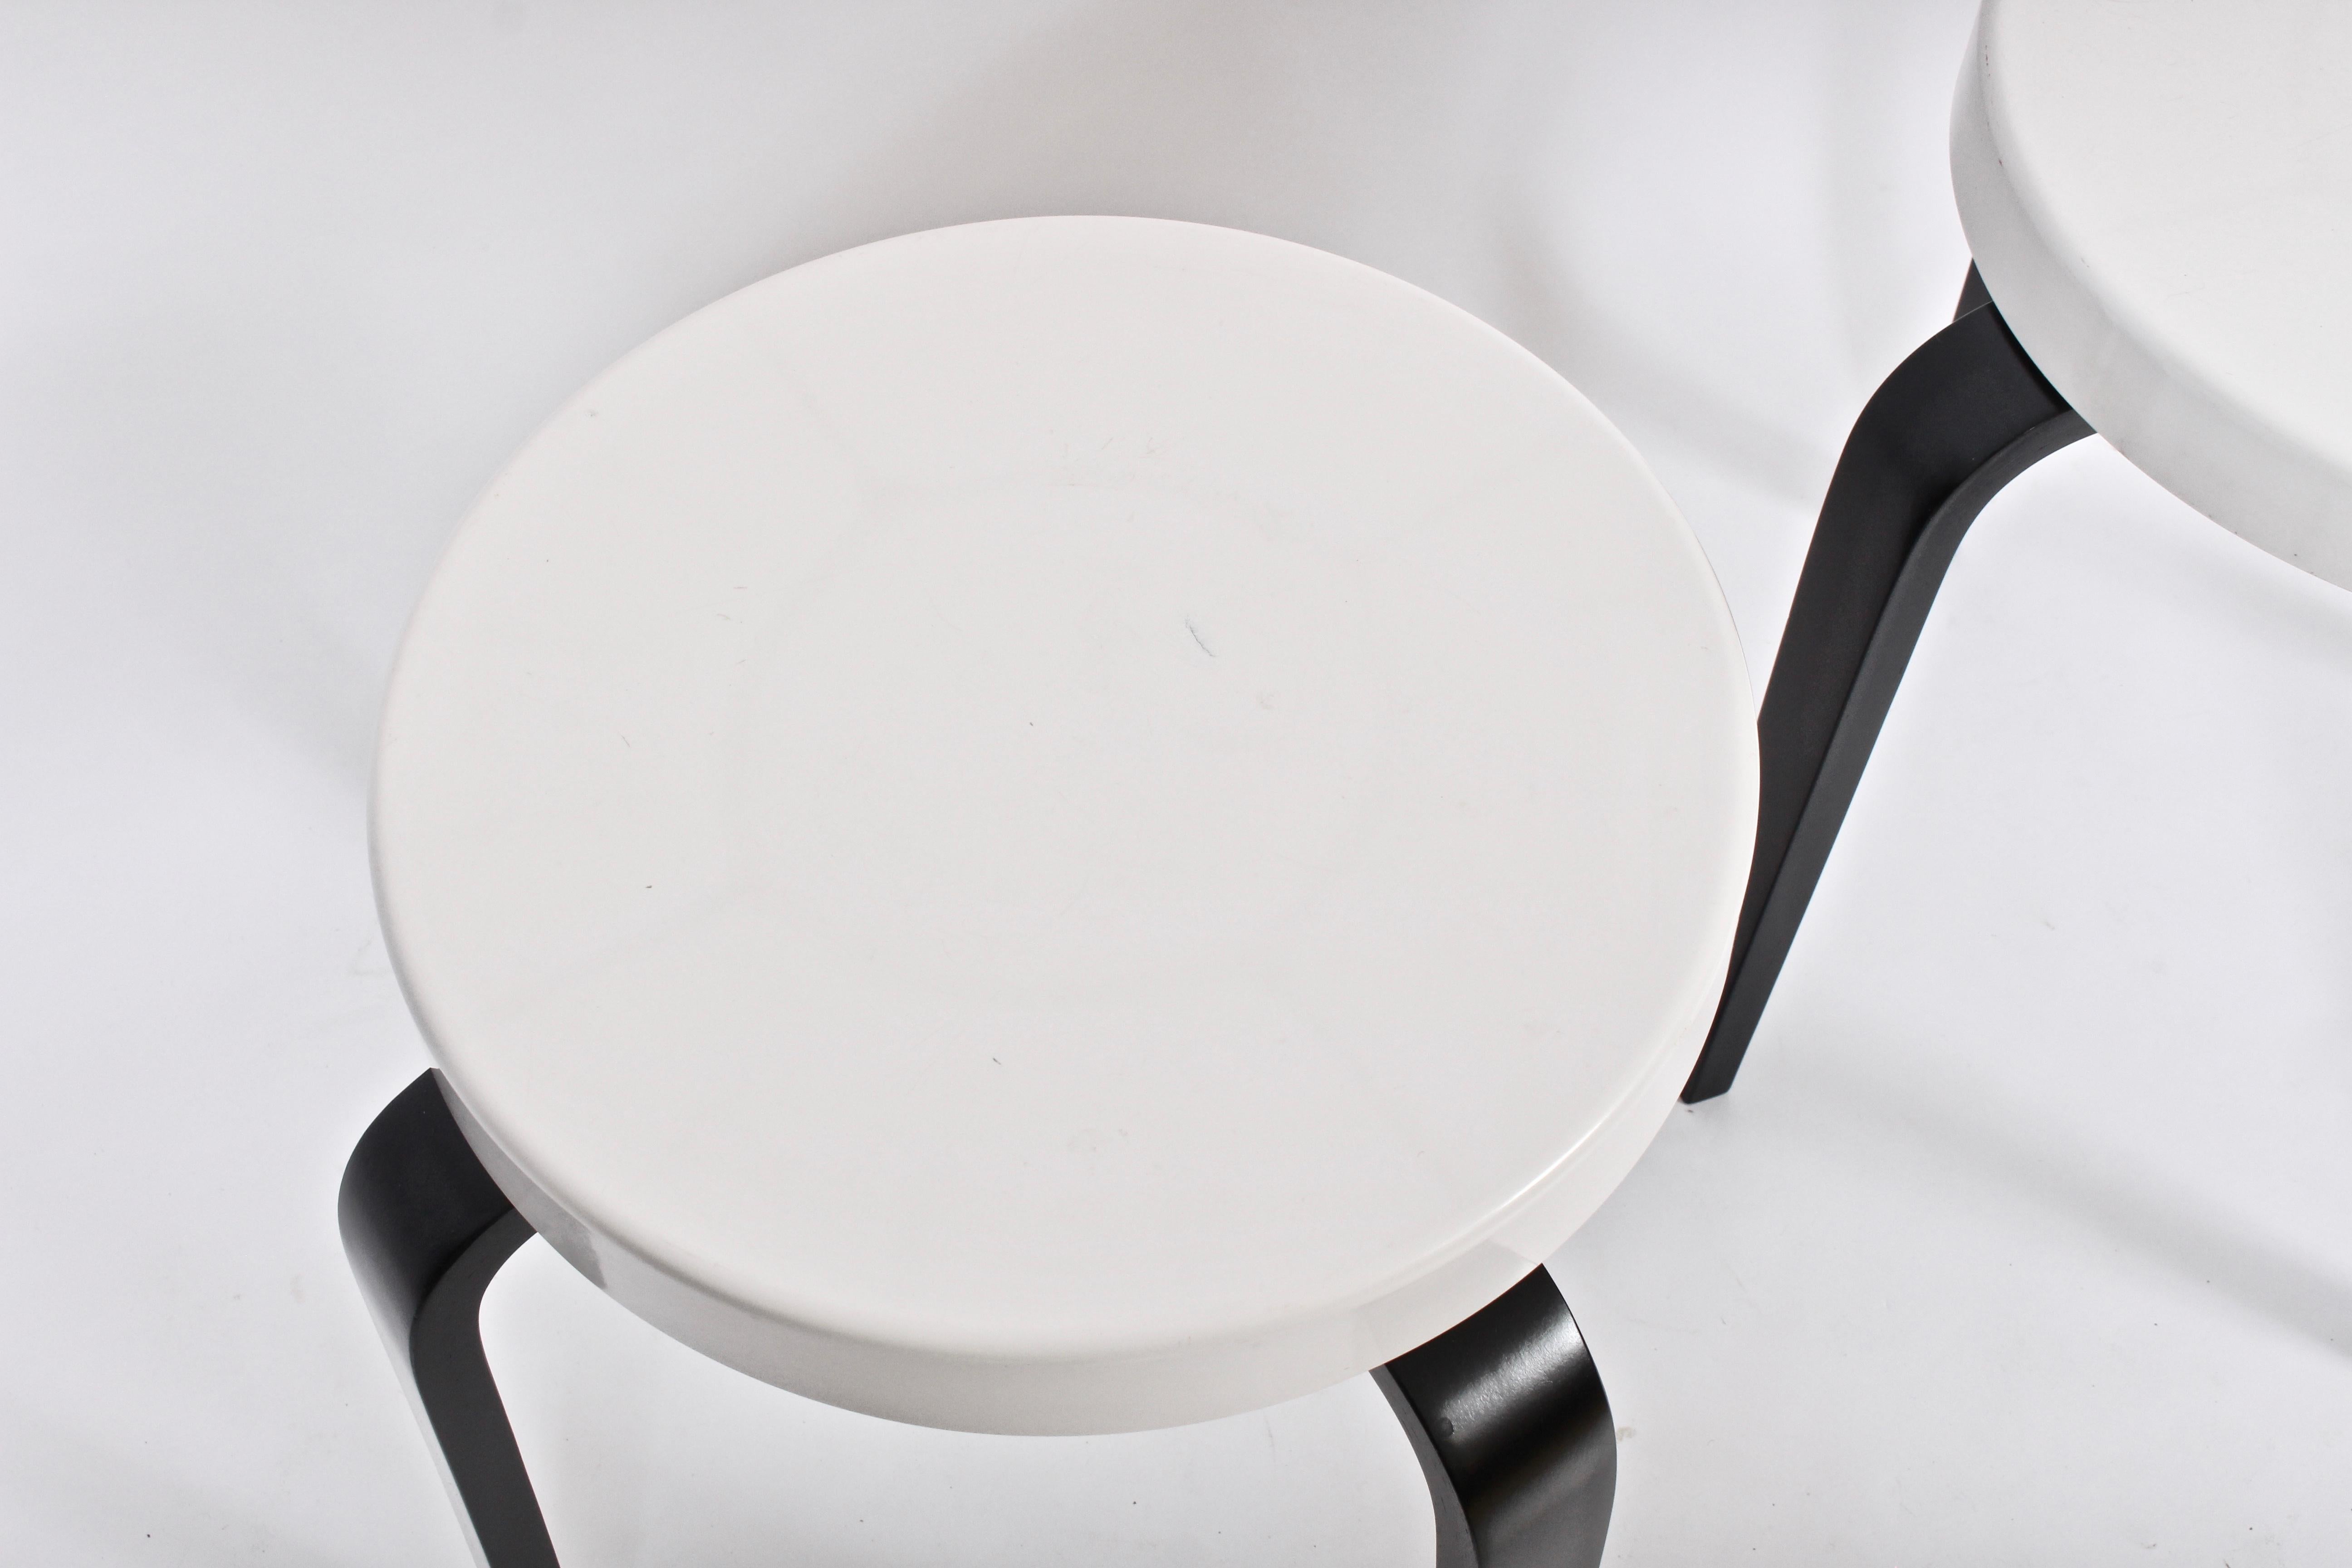 American Pair of Thonet White and Black Bakelite Stacking Stools, 1930s For Sale